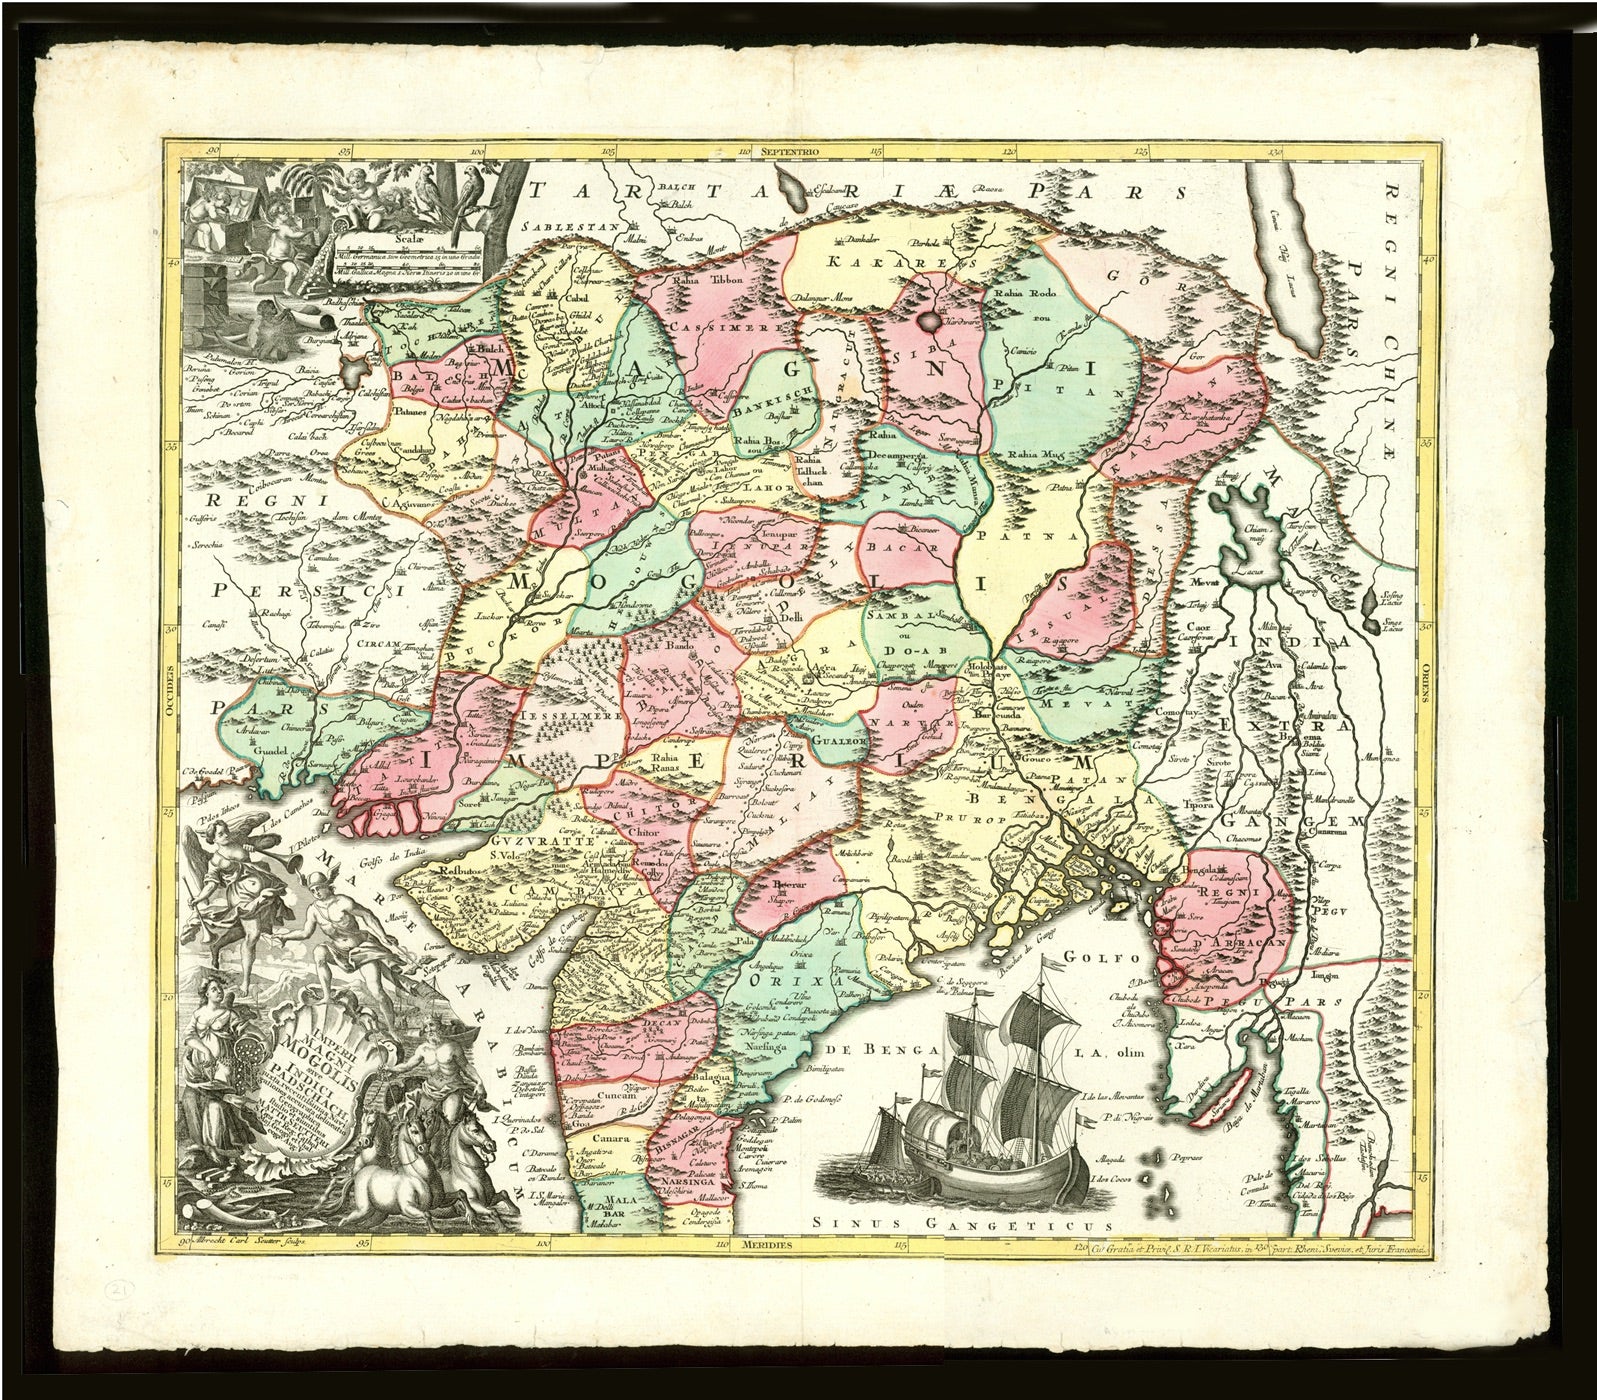 "Imperii Magni Mogolis sive Indici Padschach. . .."  Copper engraving map by M. Seutter of Augsburg. Published ca 1740.  Attractive hand coloring. Strong impression on heavy paper.  Vertical centerfold.  This map shows most of India, Myanmar, Afghanistan and Pakistan.  There are two very decorative cartouches. 